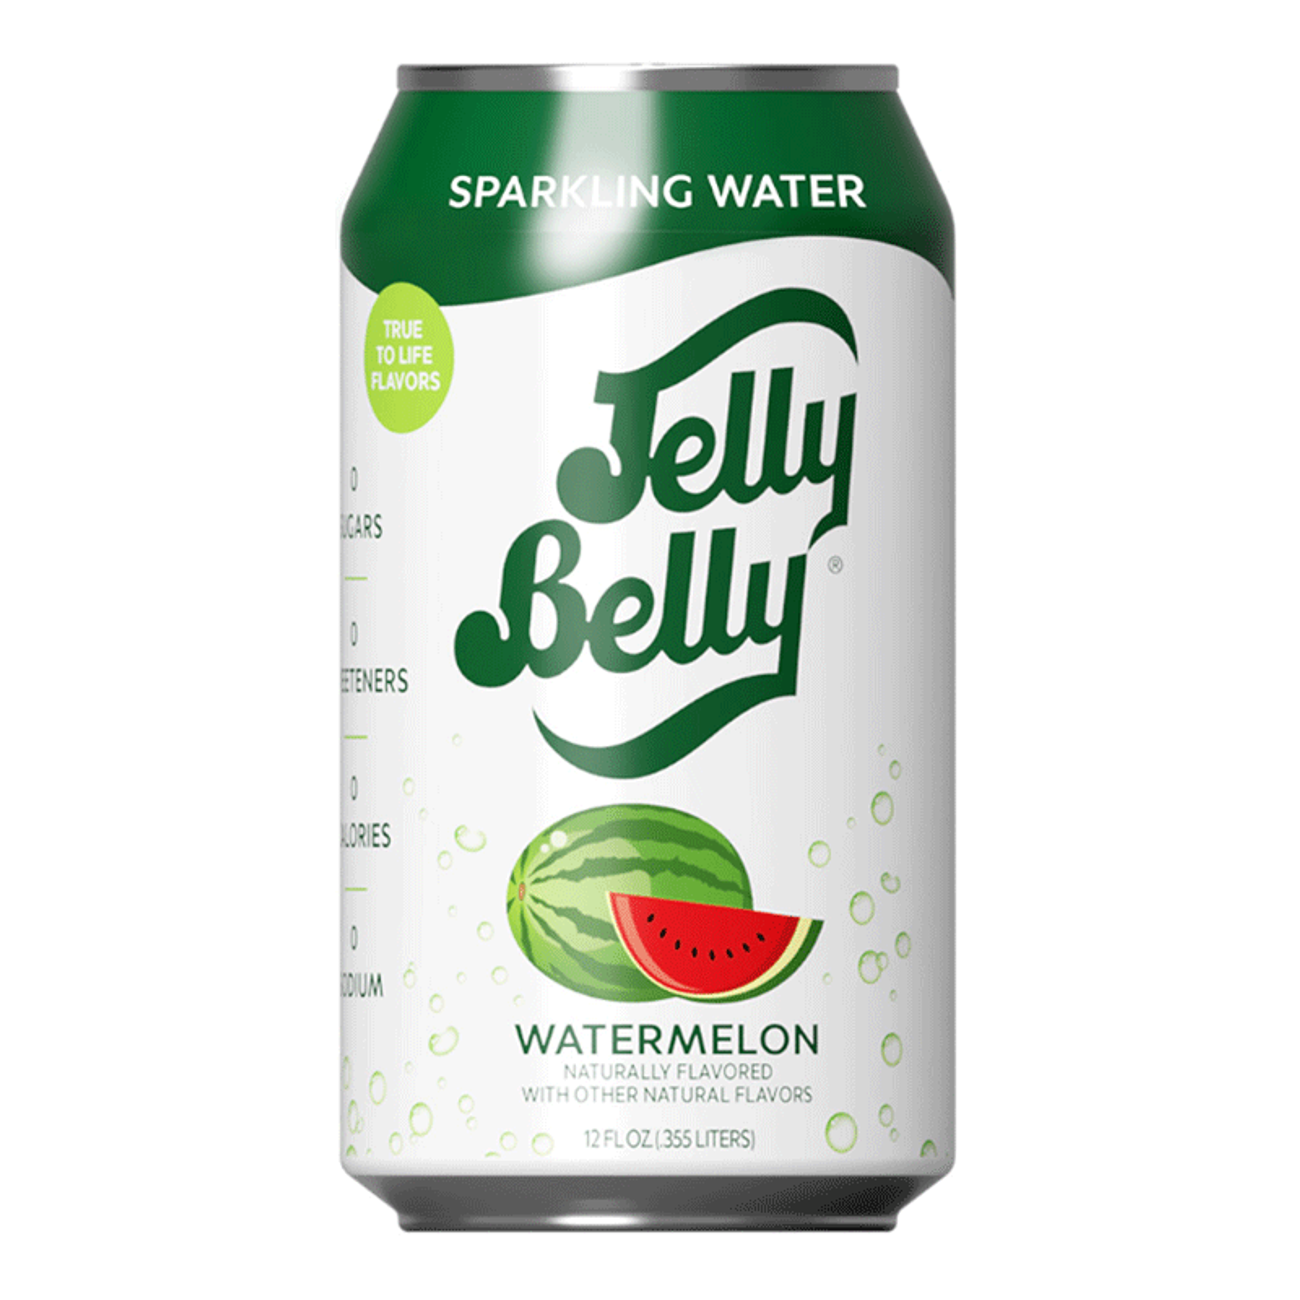 jelly-belly-watermelon-sparkling-water-76511-1